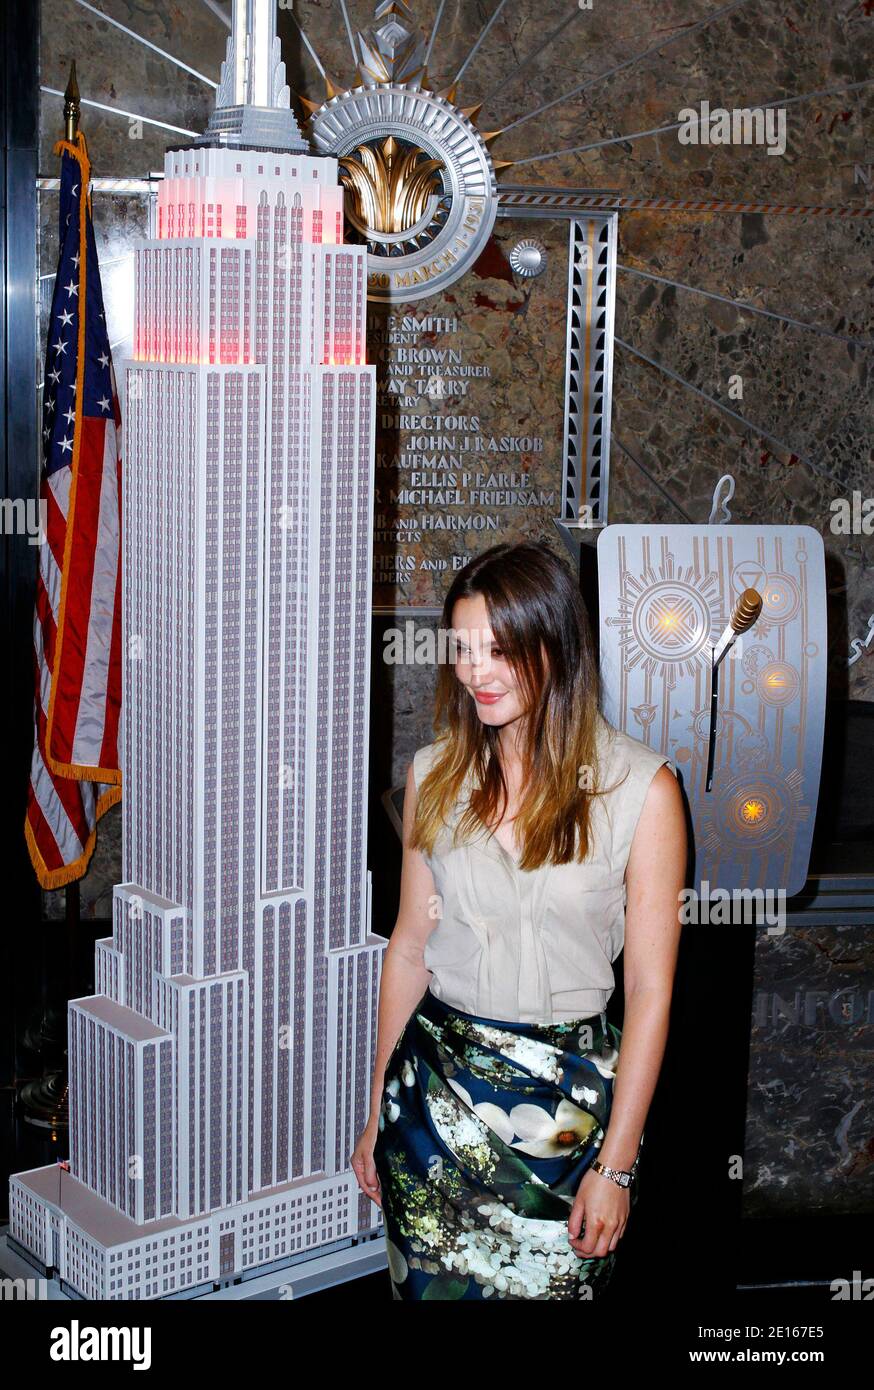 Leighton Meester appears during the lighting ceremony to celebrate the 5th Annual DKMS Gala at the Empire State Building in New York City, NY, USA on April 28, 2011. Photo by Donna Ward/ABACAPRESS.COM Stock Photo